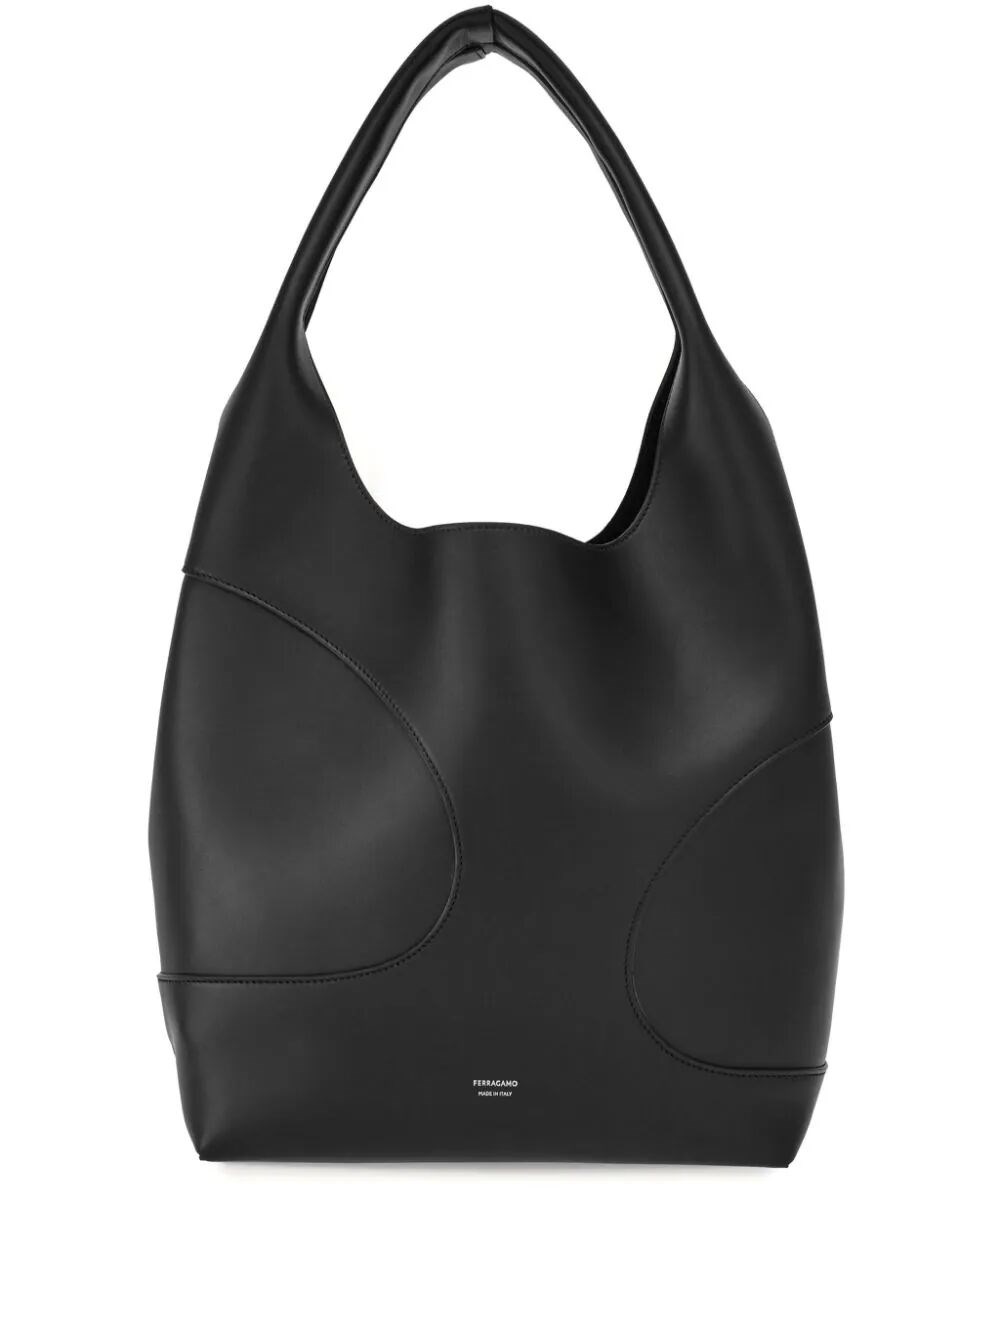 Ferragamo Hobo Bag With Cut-out Detailing In Black